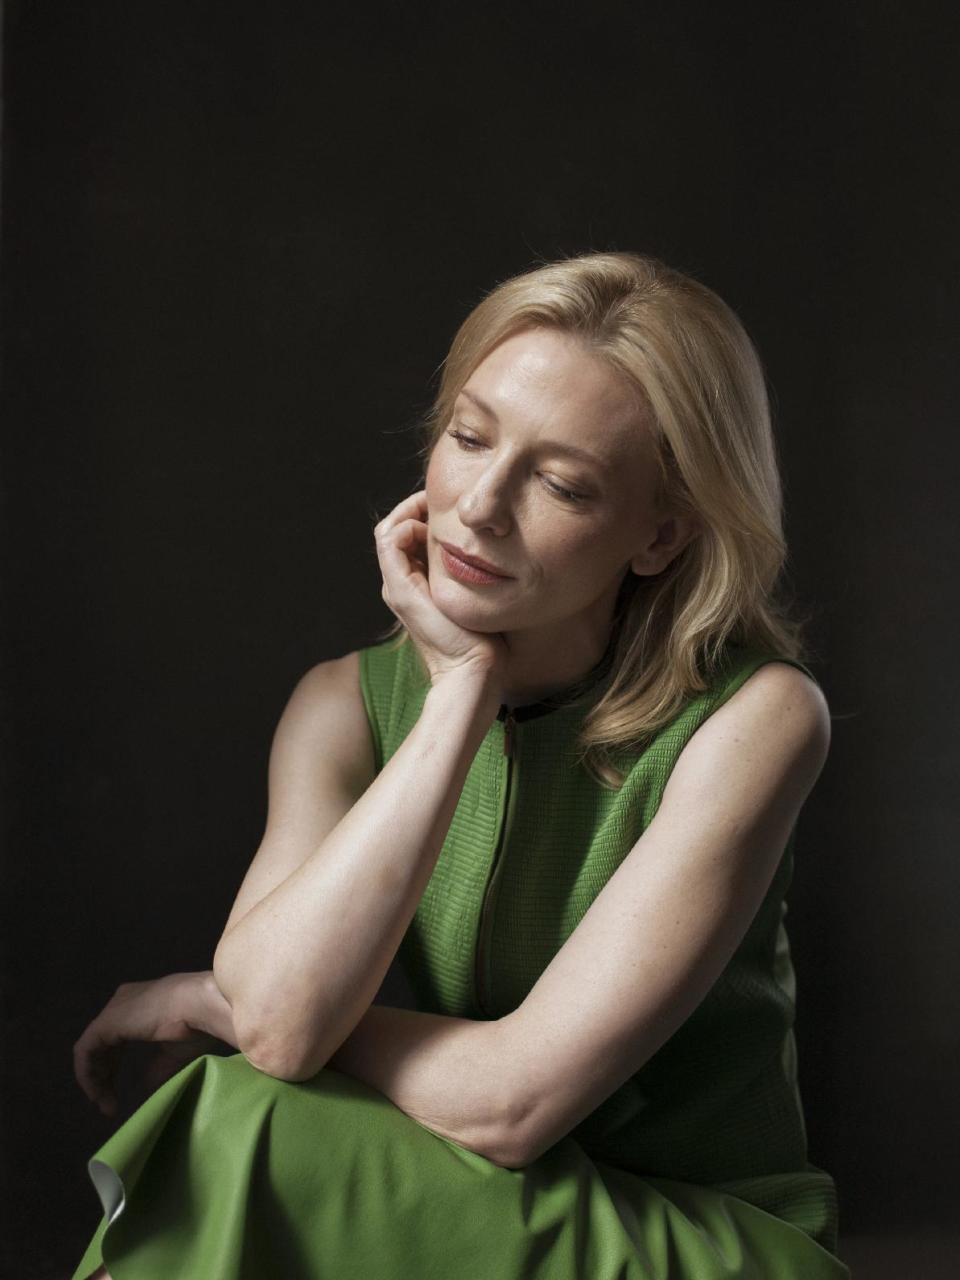 This July 23, 2013 photo shows Australian actress Cate Blanchett, star of the Woody Allen film, "Blue Jasmine," in New York. The film opens nationwide on July 26. (Photo by Victoria Will/Invision/AP)